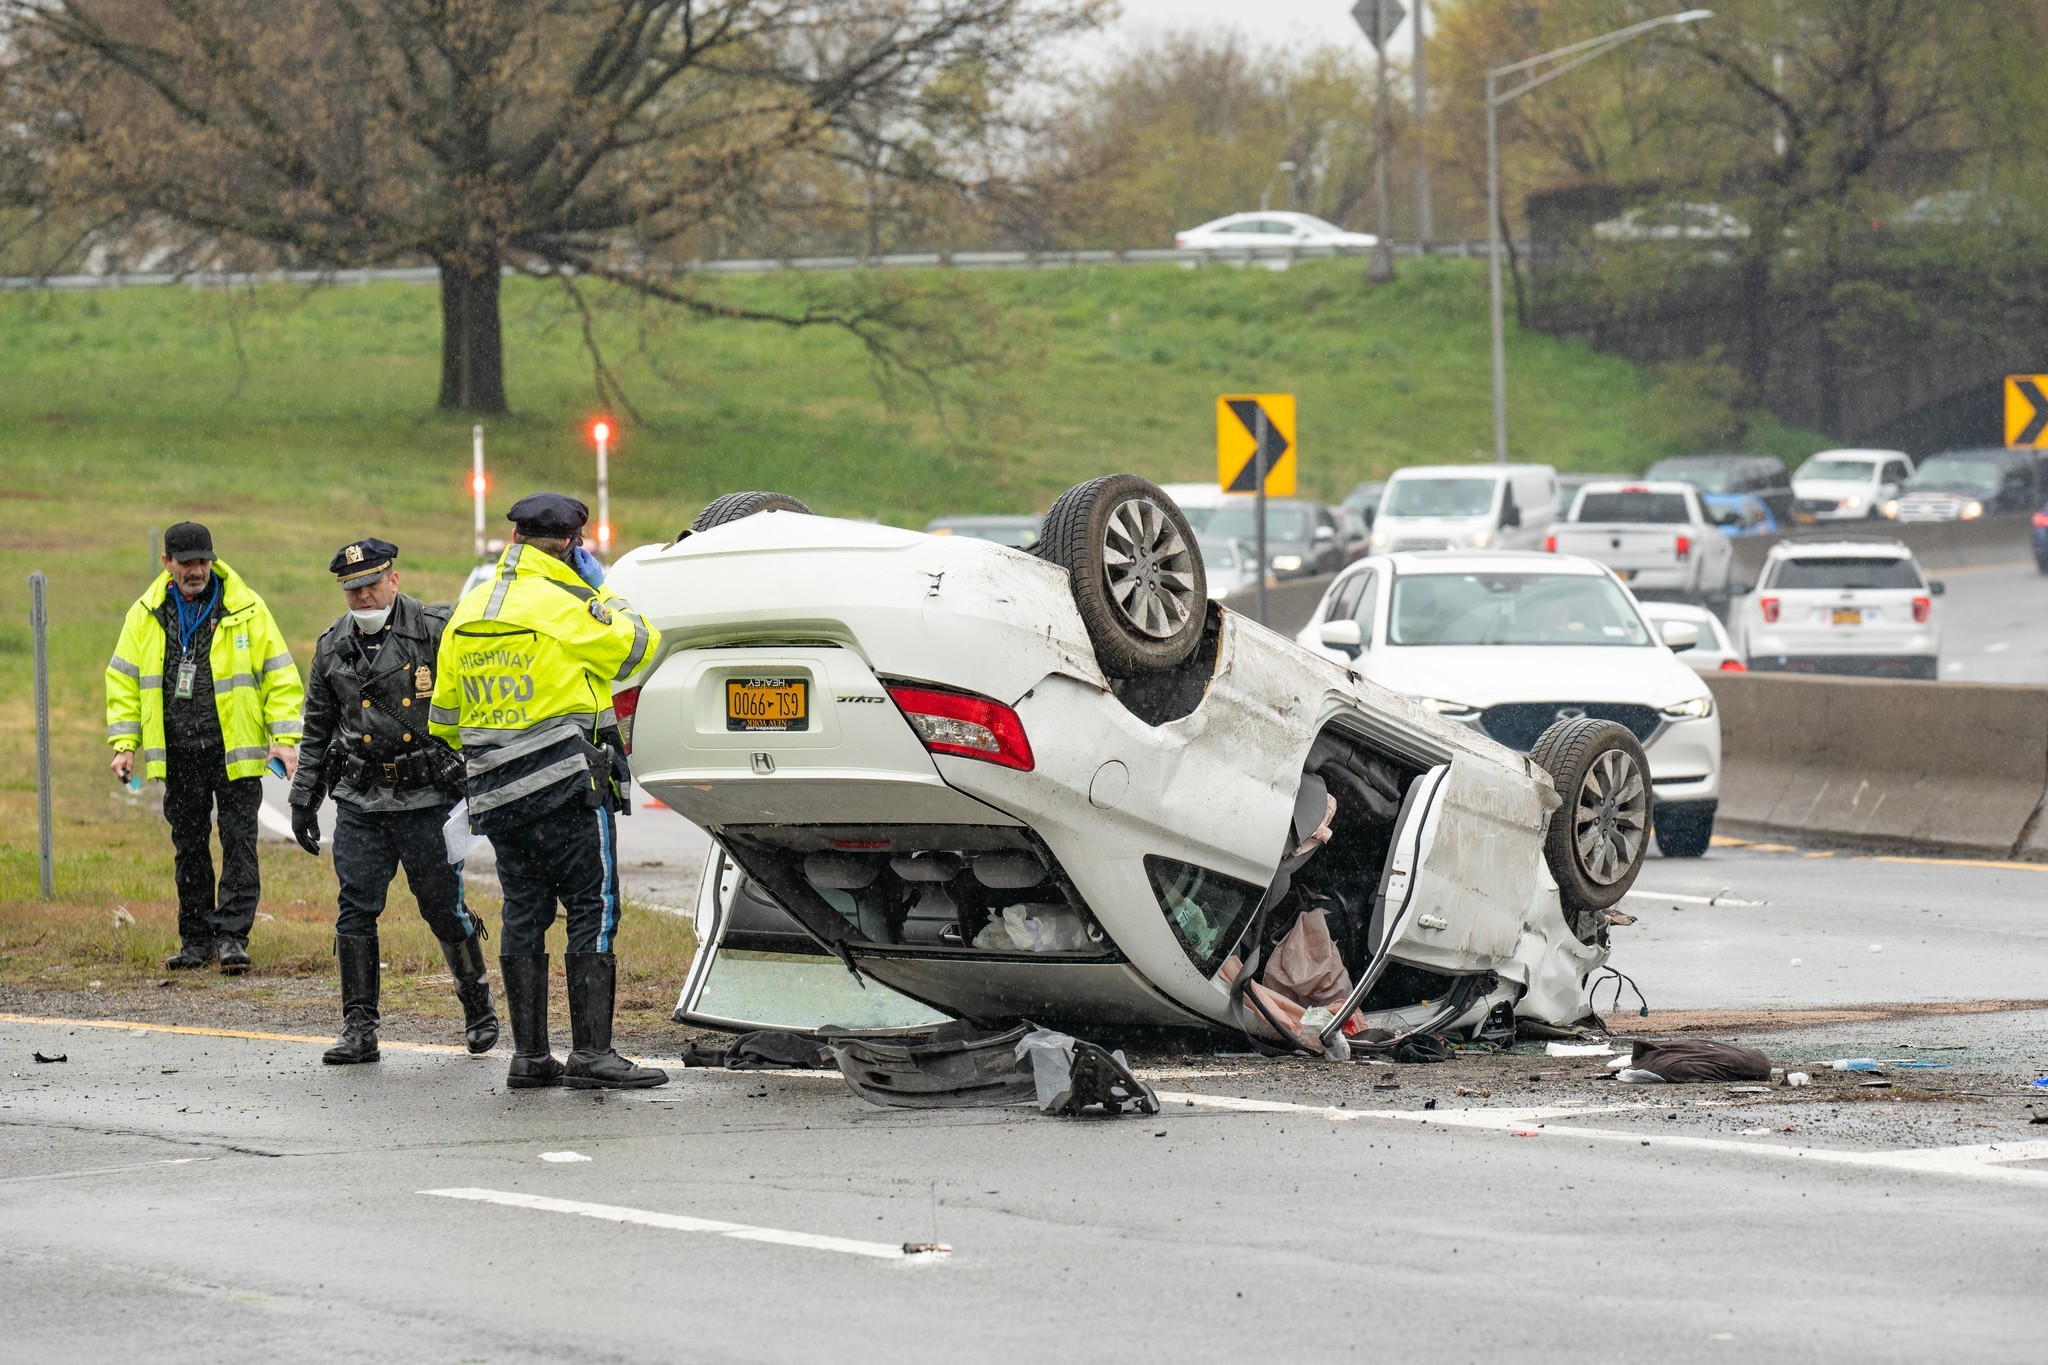 Woman clinging to life after single-car crash in Queens